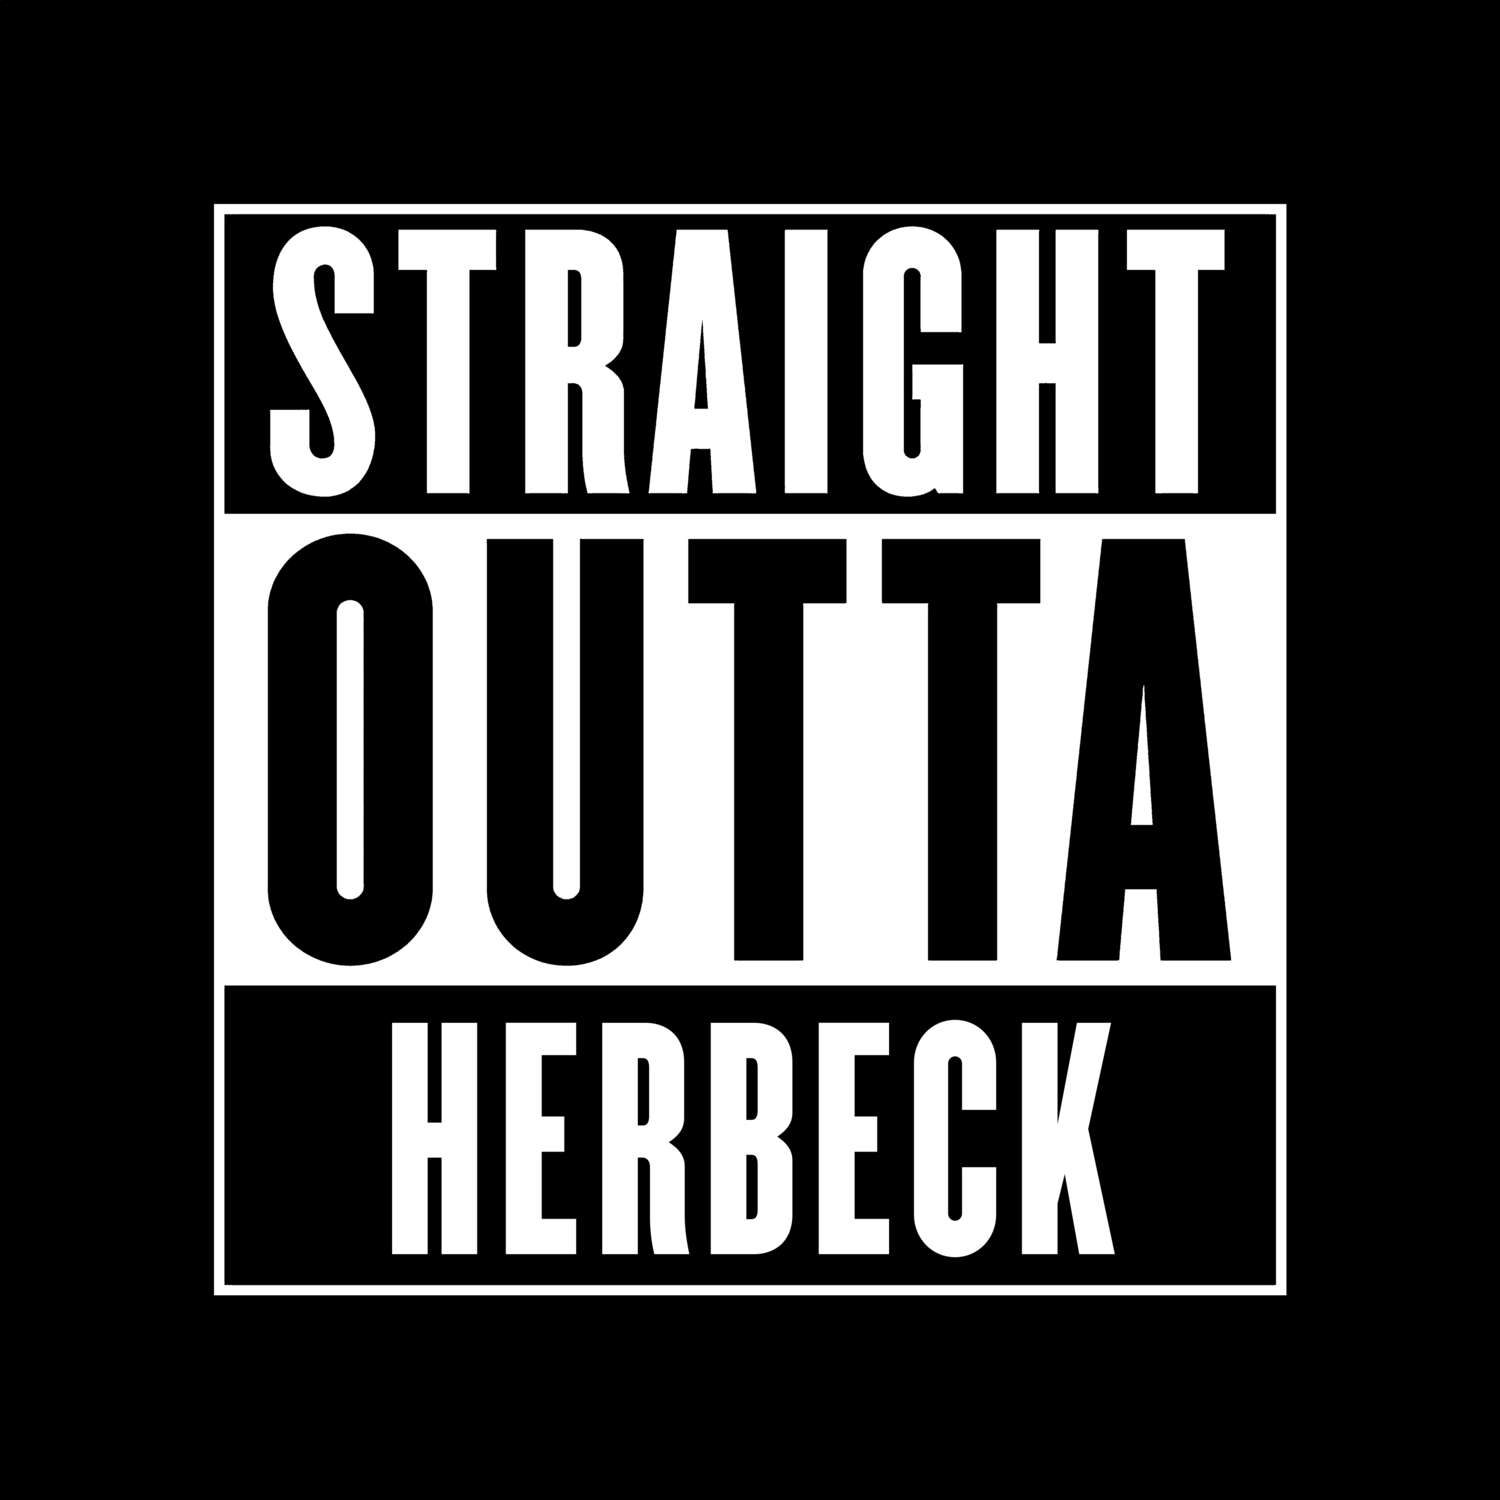 Herbeck T-Shirt »Straight Outta«